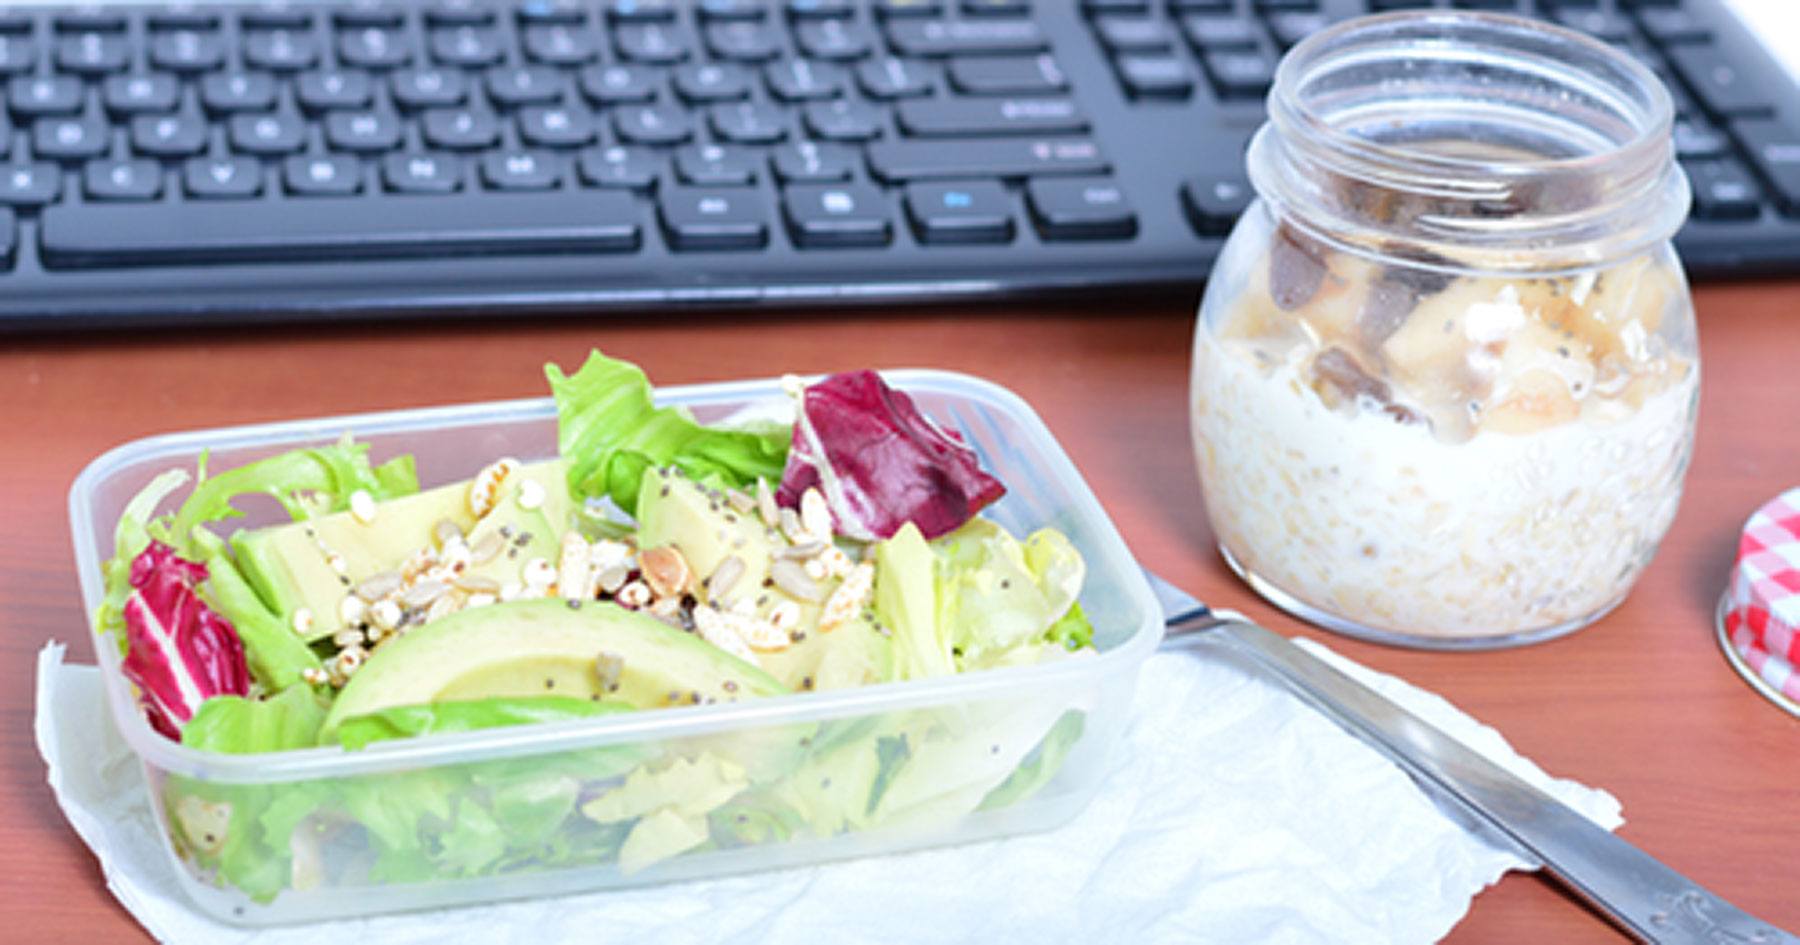 10 Tips to Eat Healthy at Work | Kim Okamura DDS